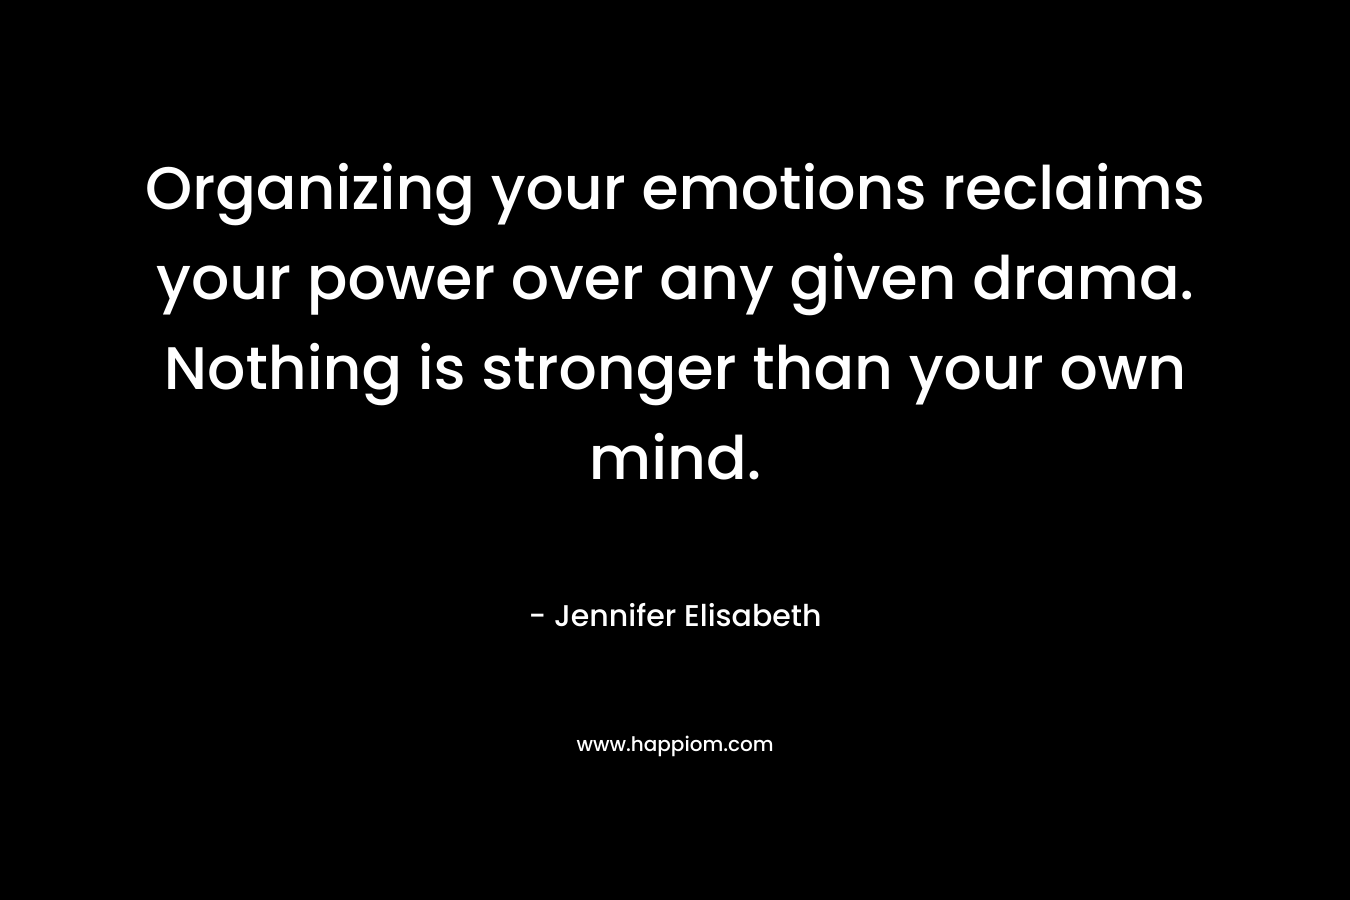 Organizing your emotions reclaims your power over any given drama. Nothing is stronger than your own mind.